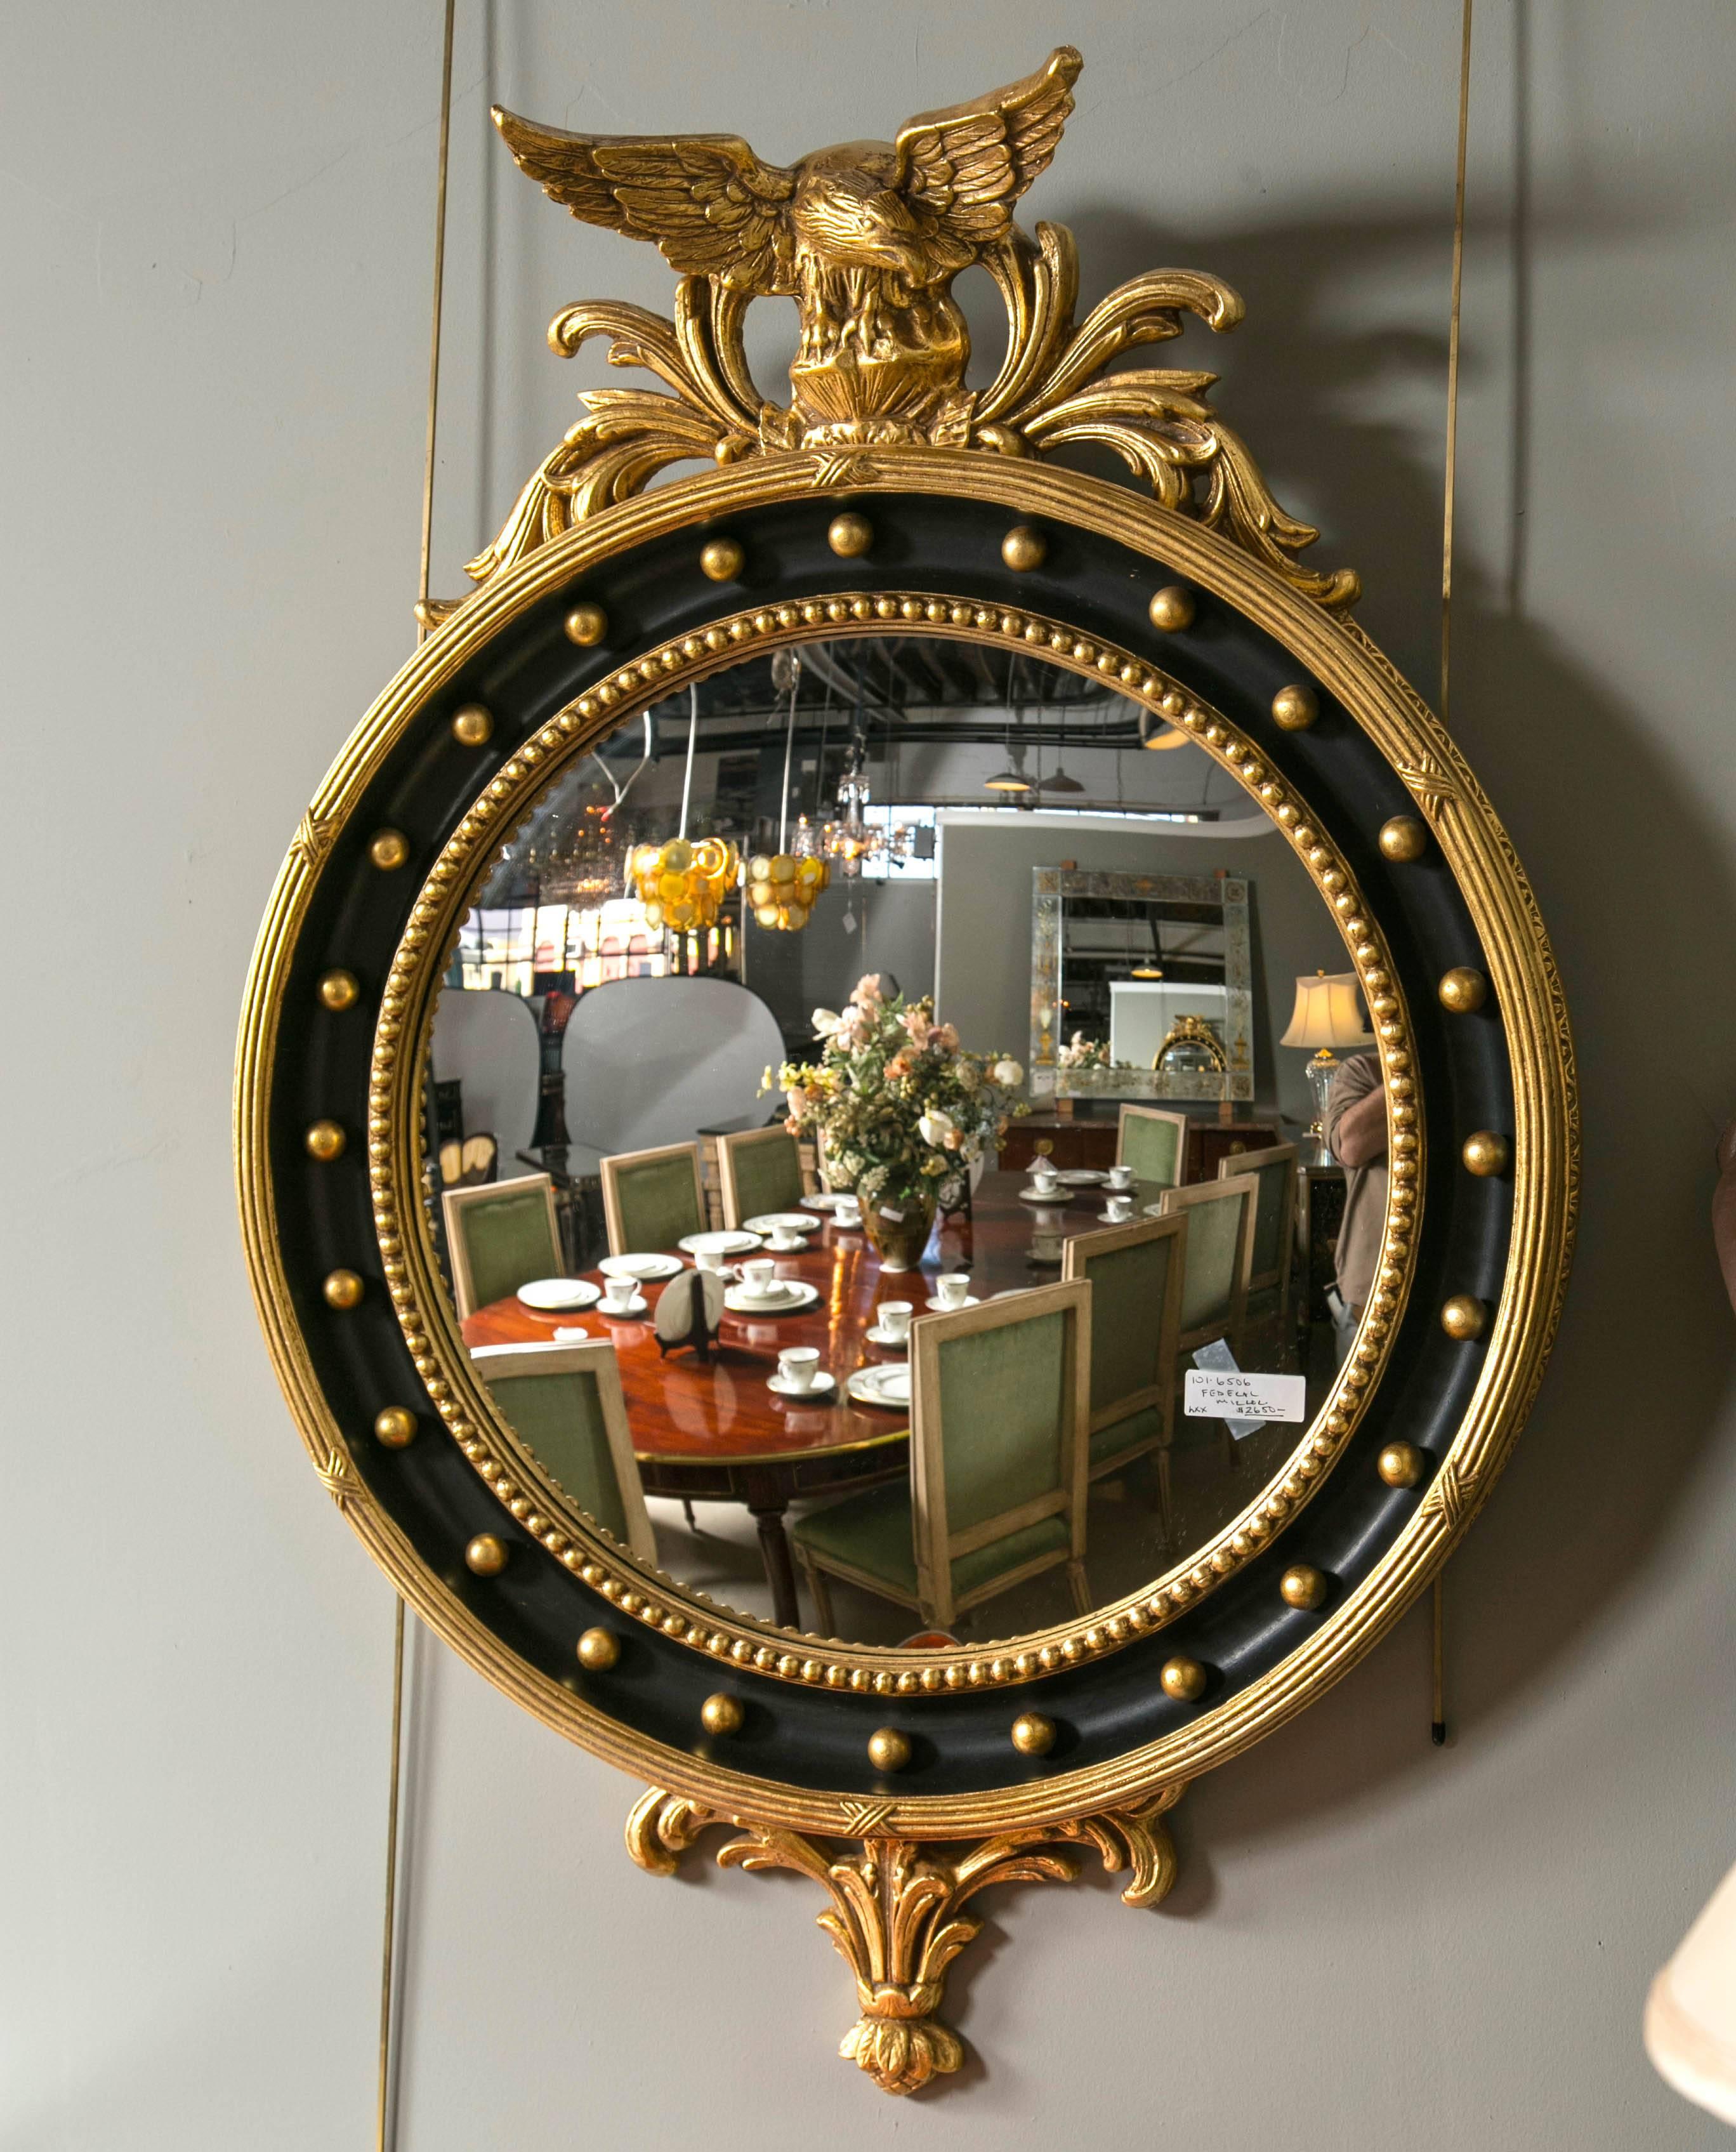 A custom quality bullseye mirror with a fabulous perched eagle crest. Fantastic design with bullseye encompassing the glass atop a black circular quality wood with gilt framing depicting X design. The crest is an eagle landing on a rock. The detail